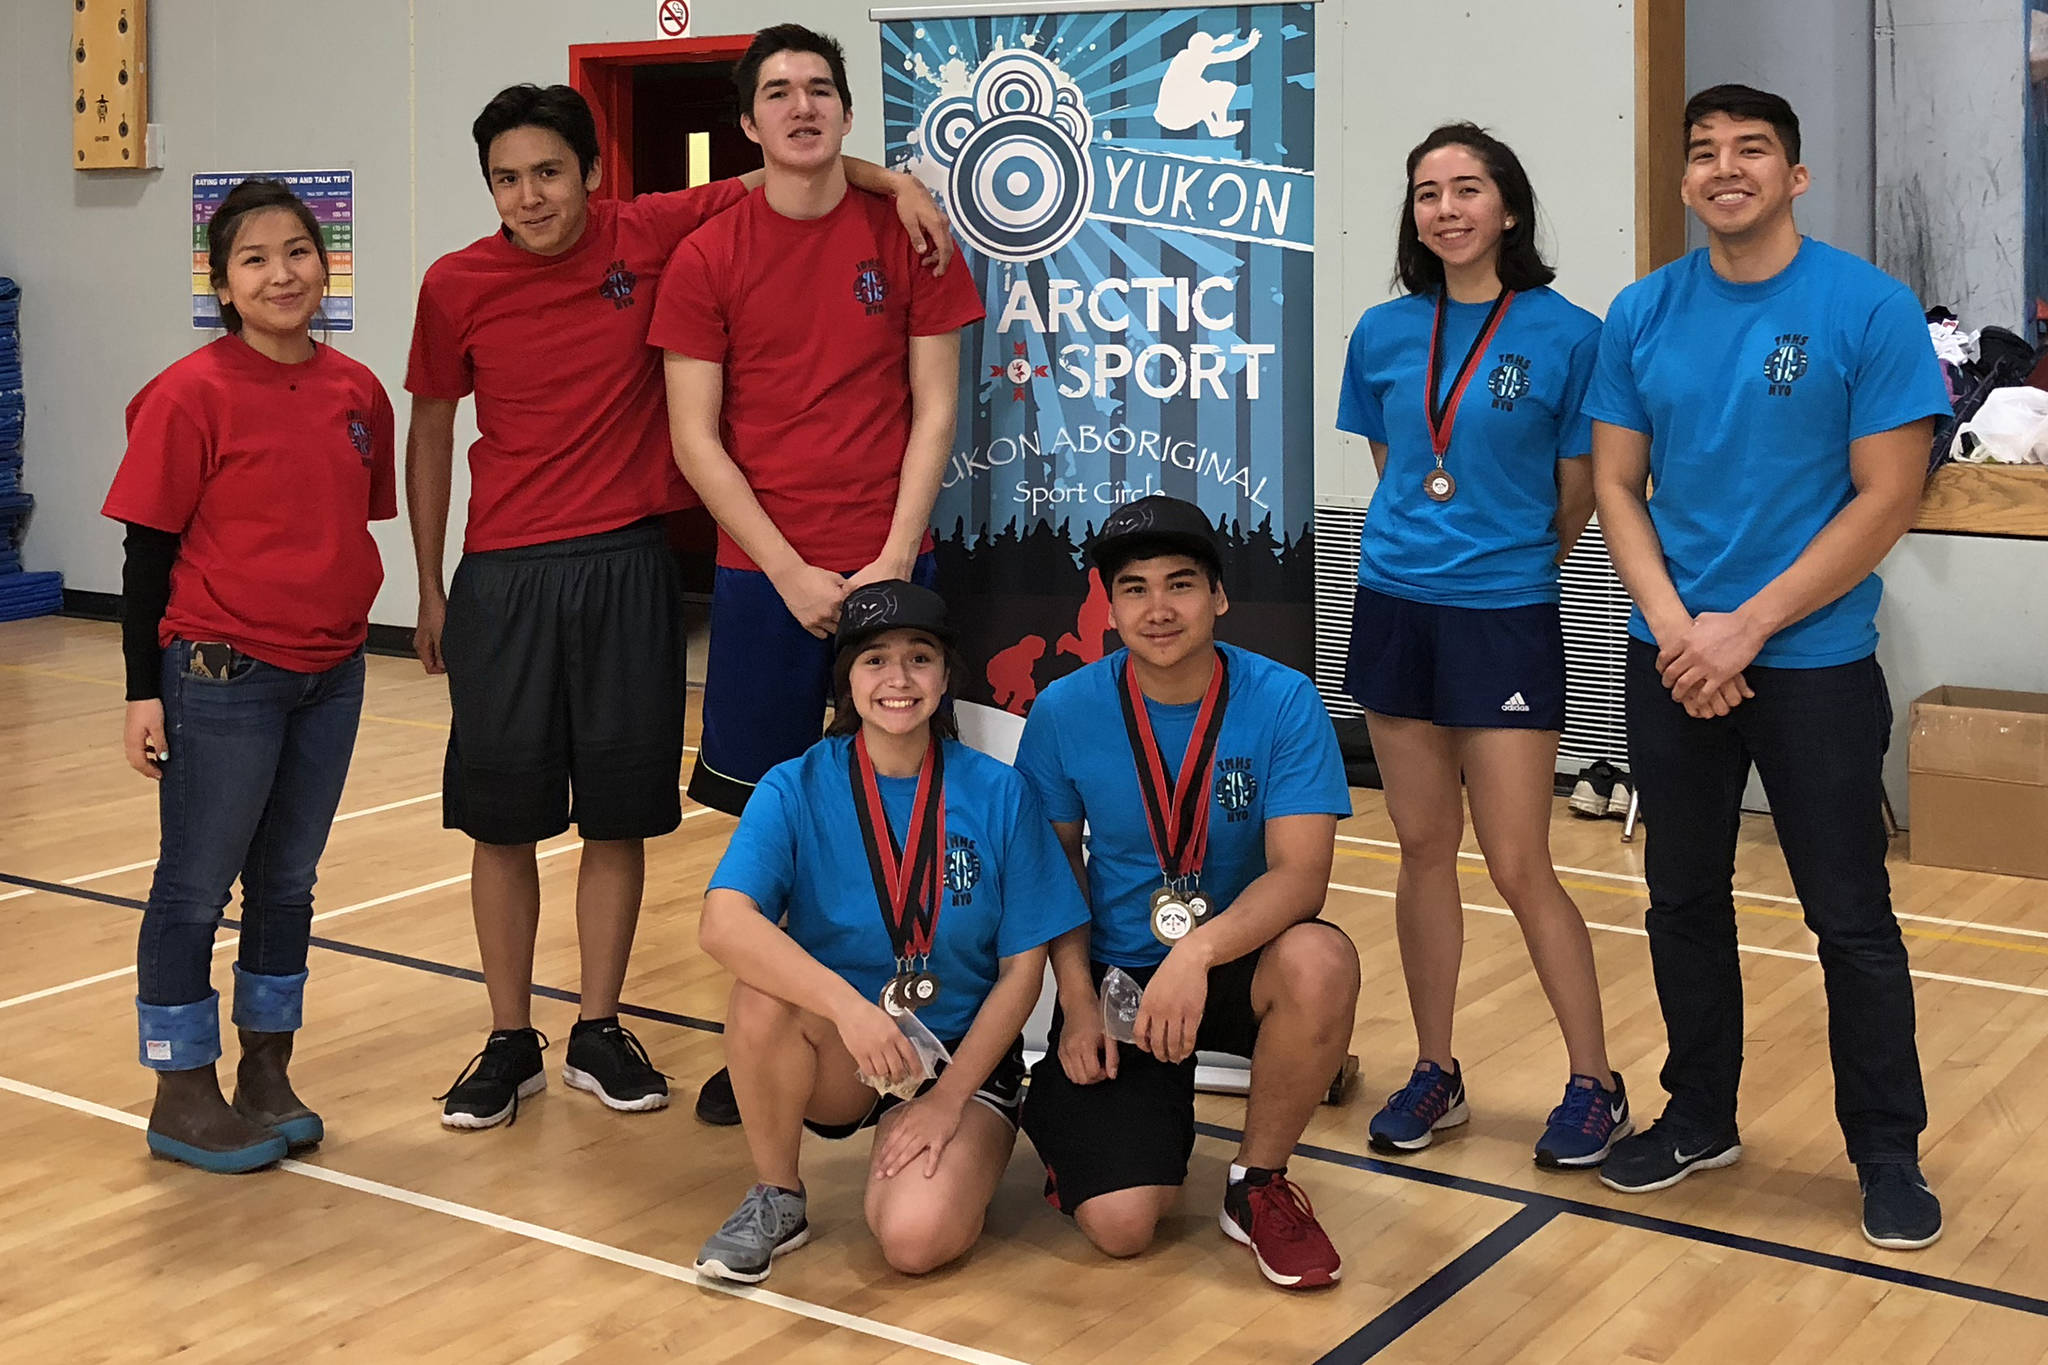 Team Juneau poses with its medals after competing in the Yukon Inter-Schools Arctic Sports Championships at the Porter Creek Secondary School in Whitehorse, Yukon, on Friday, Nov. 30, 2018. Top row (Left to right): Coach Kaytlynne Lewis, Erik Jim, Josh Sheakley, Sara Steeves, coach Kyle Worl. Bottom row: Orion Denny, Matthew Quinto. (Courtesy Photo | Kyle Worl)